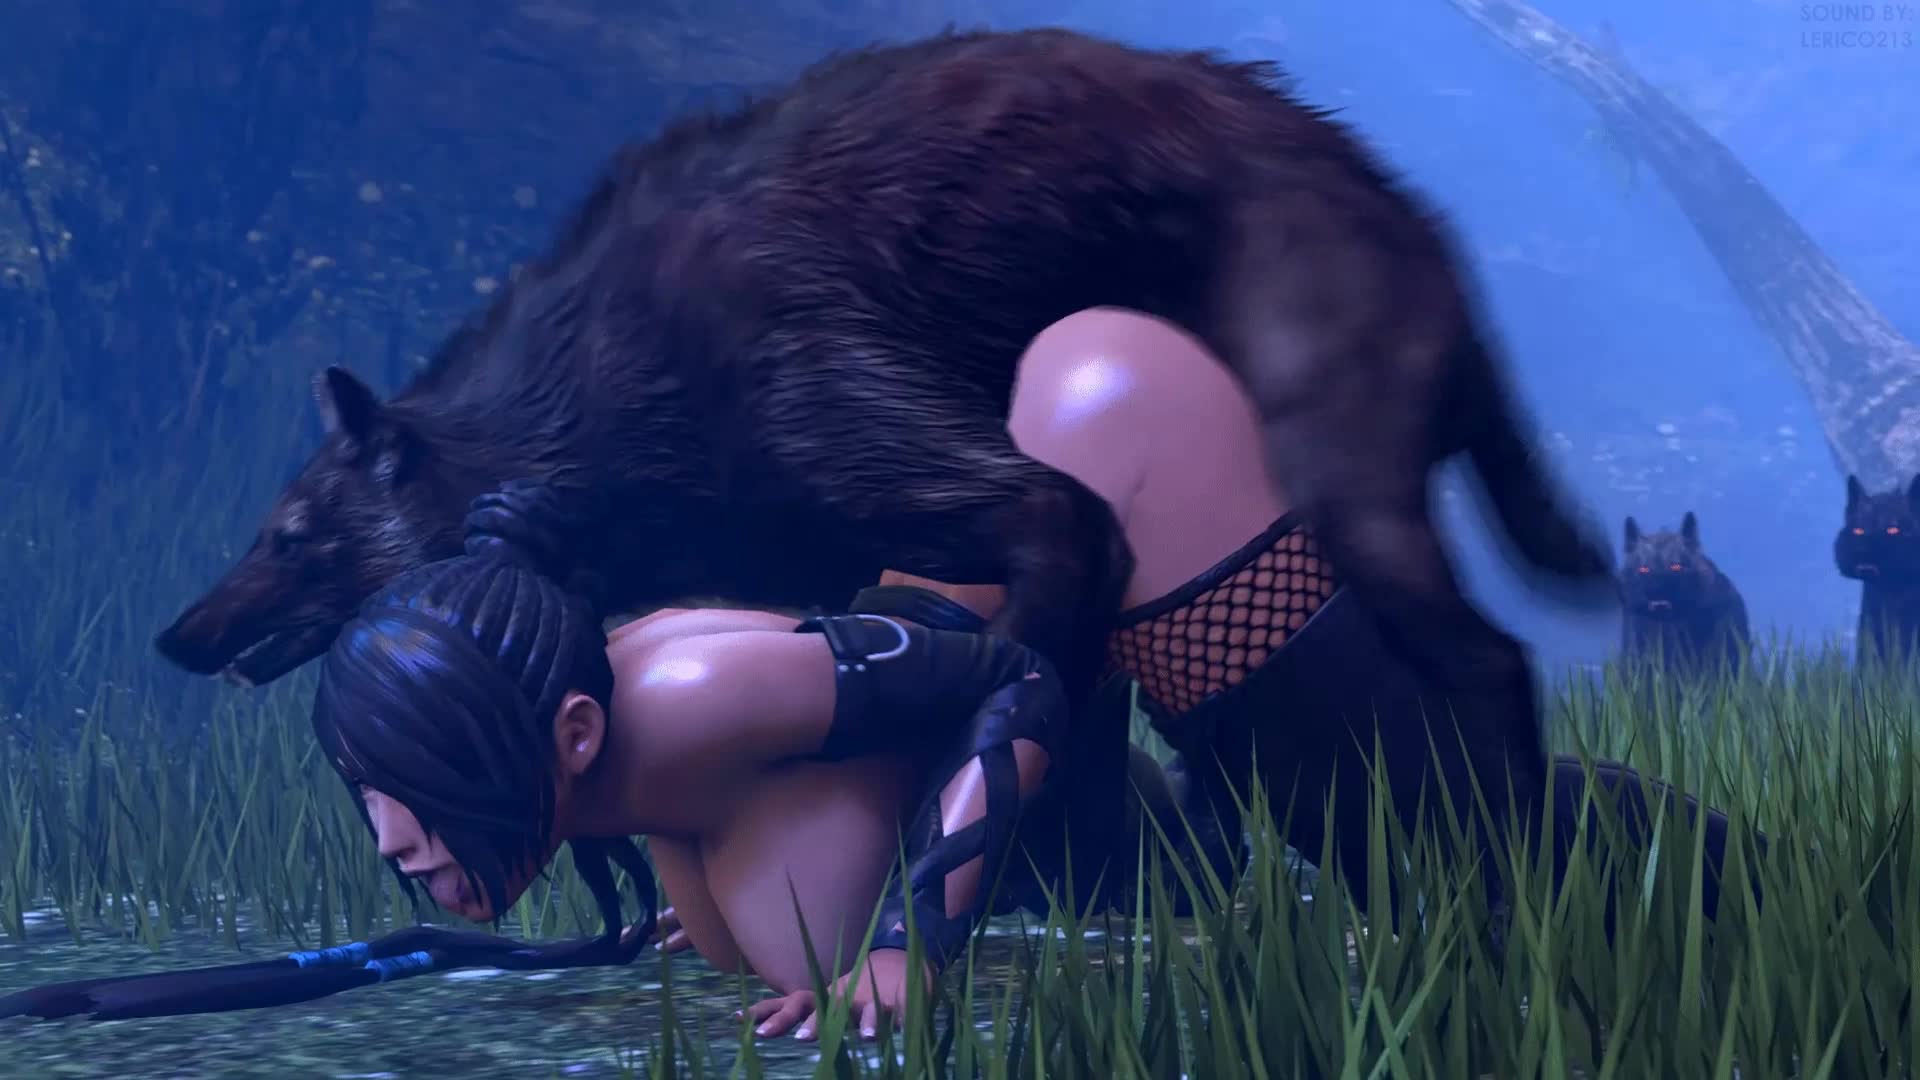 Lulu Gets Wolf Dick From Behind - Final Fantasy NSFW animation thumbnail.